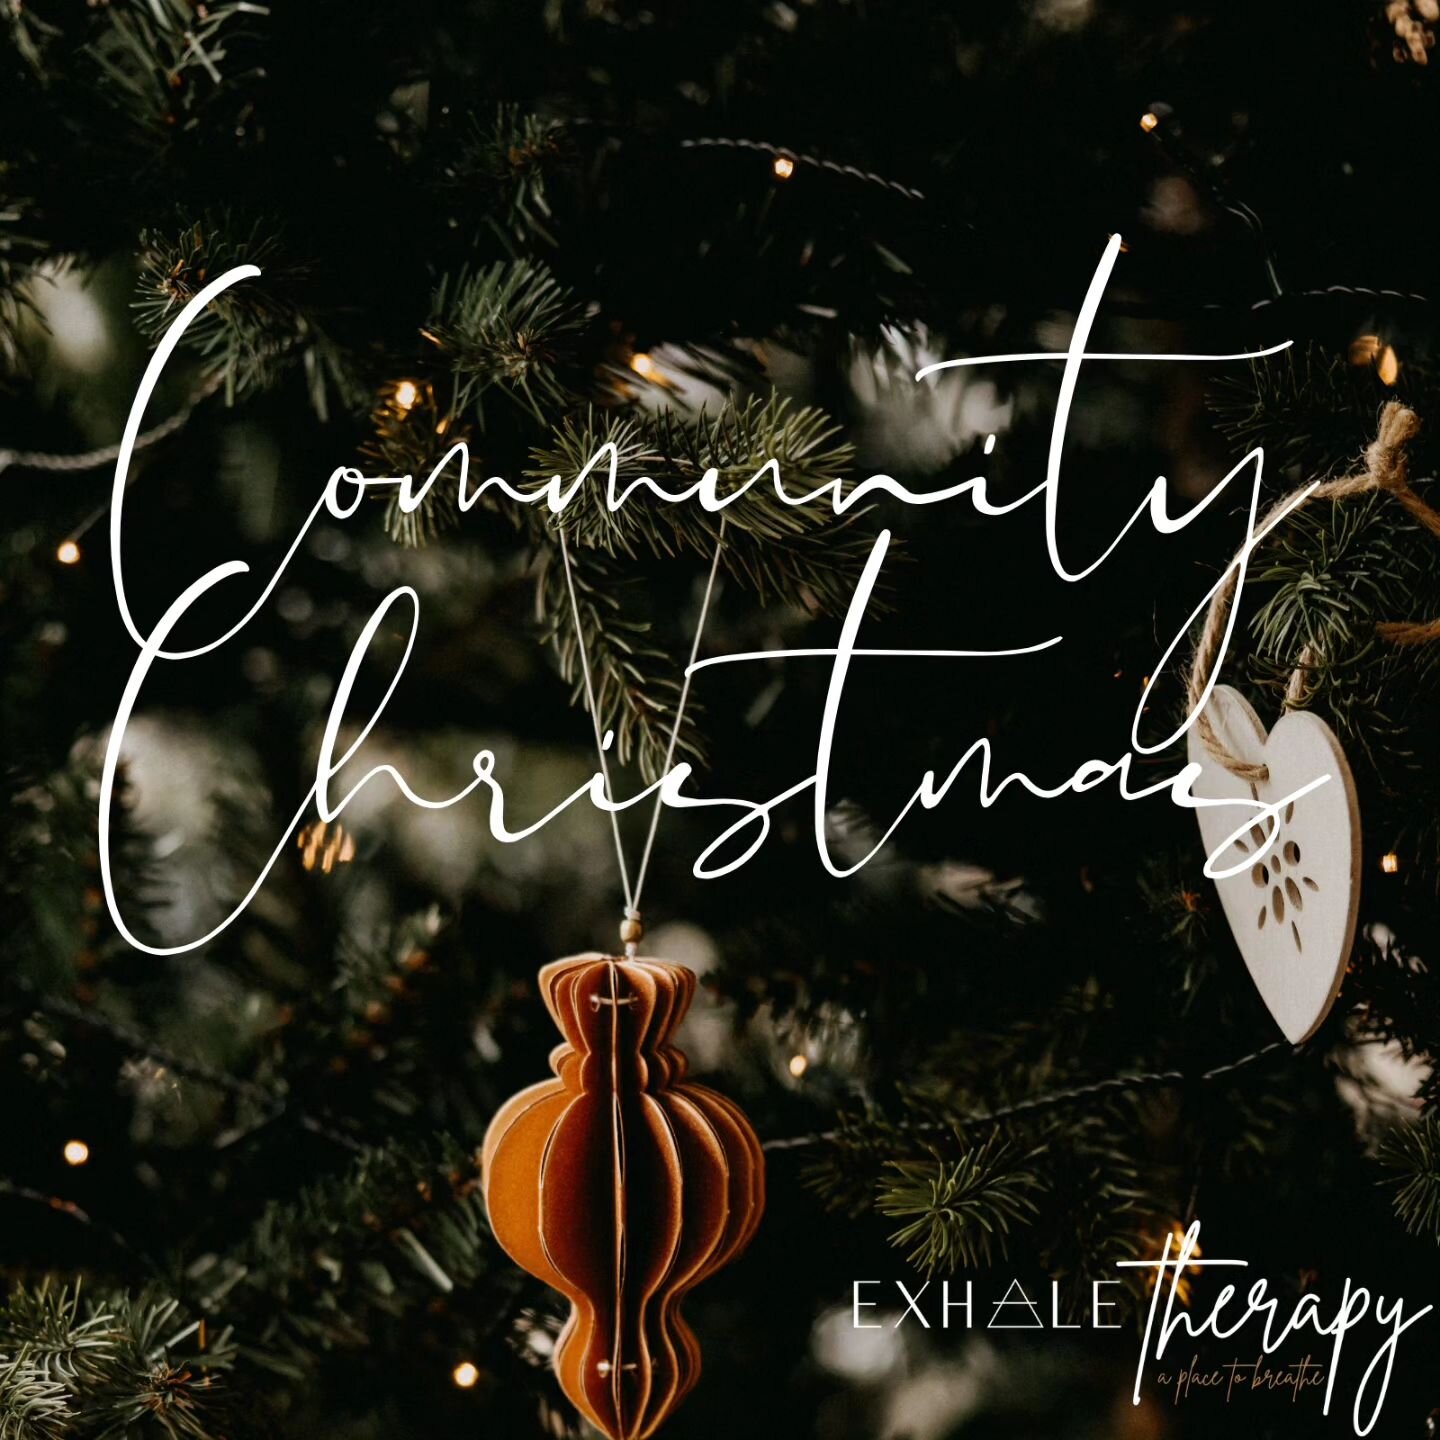 🎄 It's that time of year again! 🌟 We're thrilled to announce the launch of our 4th Annual Community Christmas Initiative here at Exhale Therapy!

At the heart of the season, we believe in the magic of giving and the strength of our community. Wheth